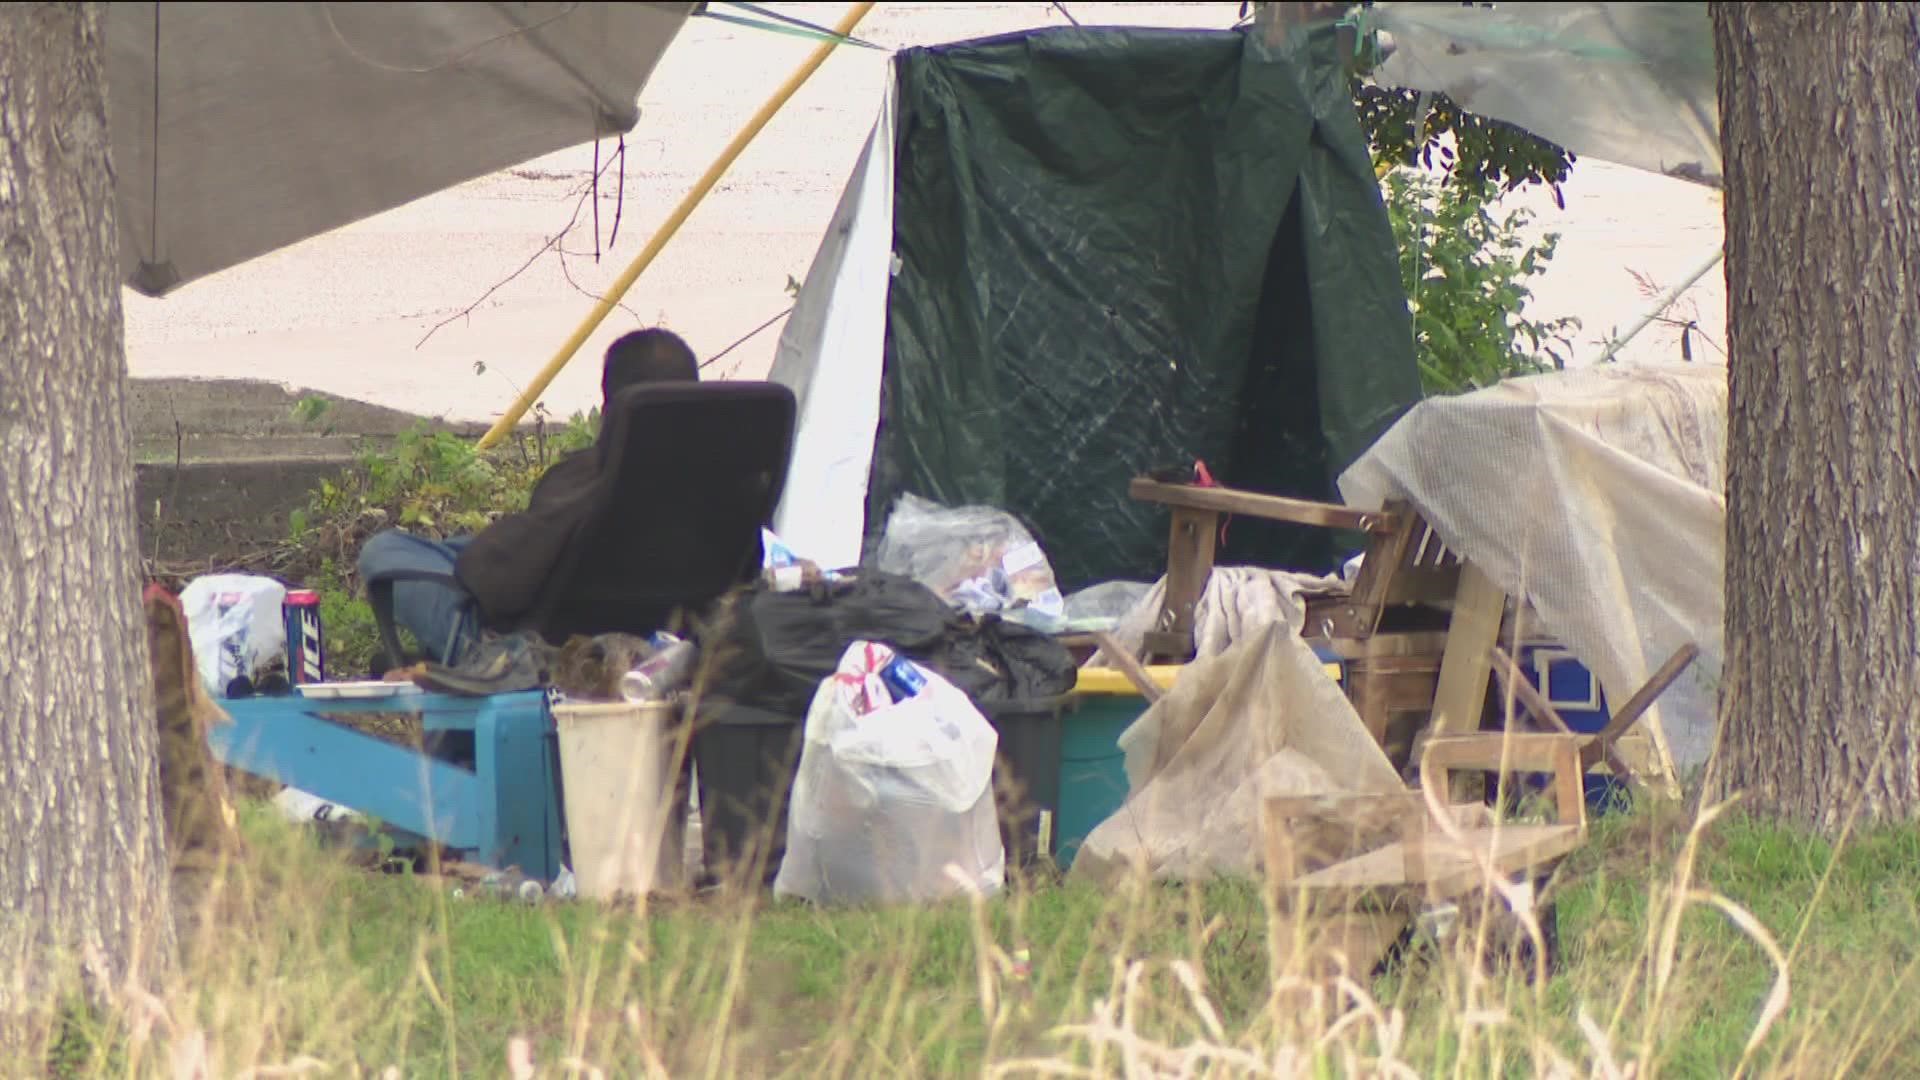 Residents in a South Austin neighborhood want the City to do something about a homeless camp near their homes. Neighbors say it is creating unsafe conditions.